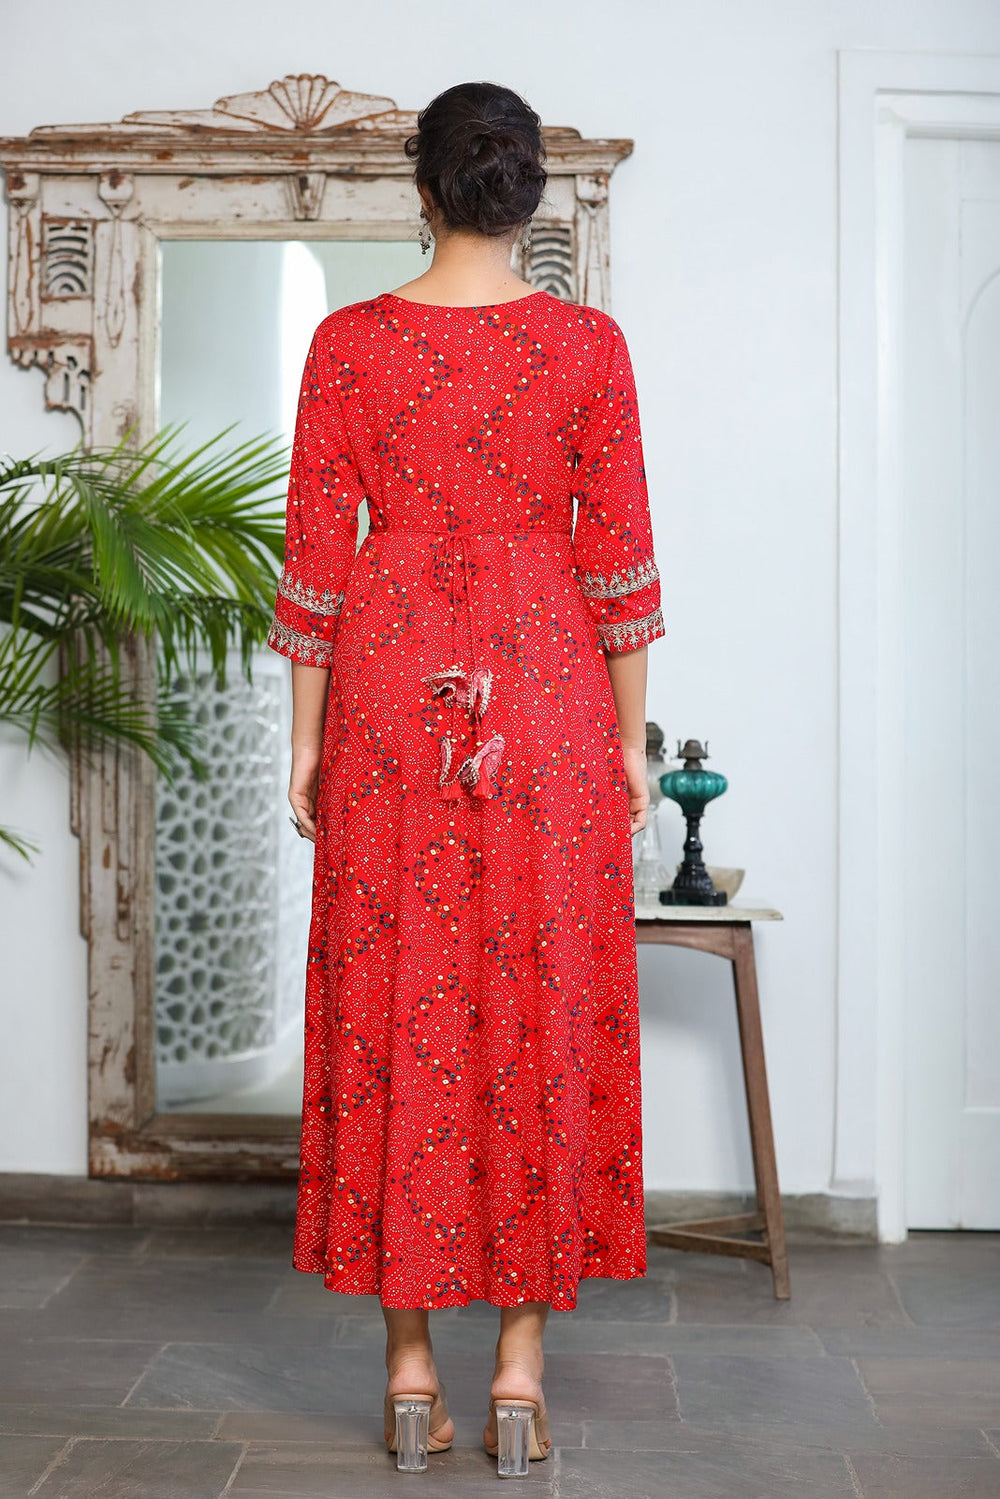 Red Bandhani Embroidered Dress-Yufta Store-9345DRSRDS